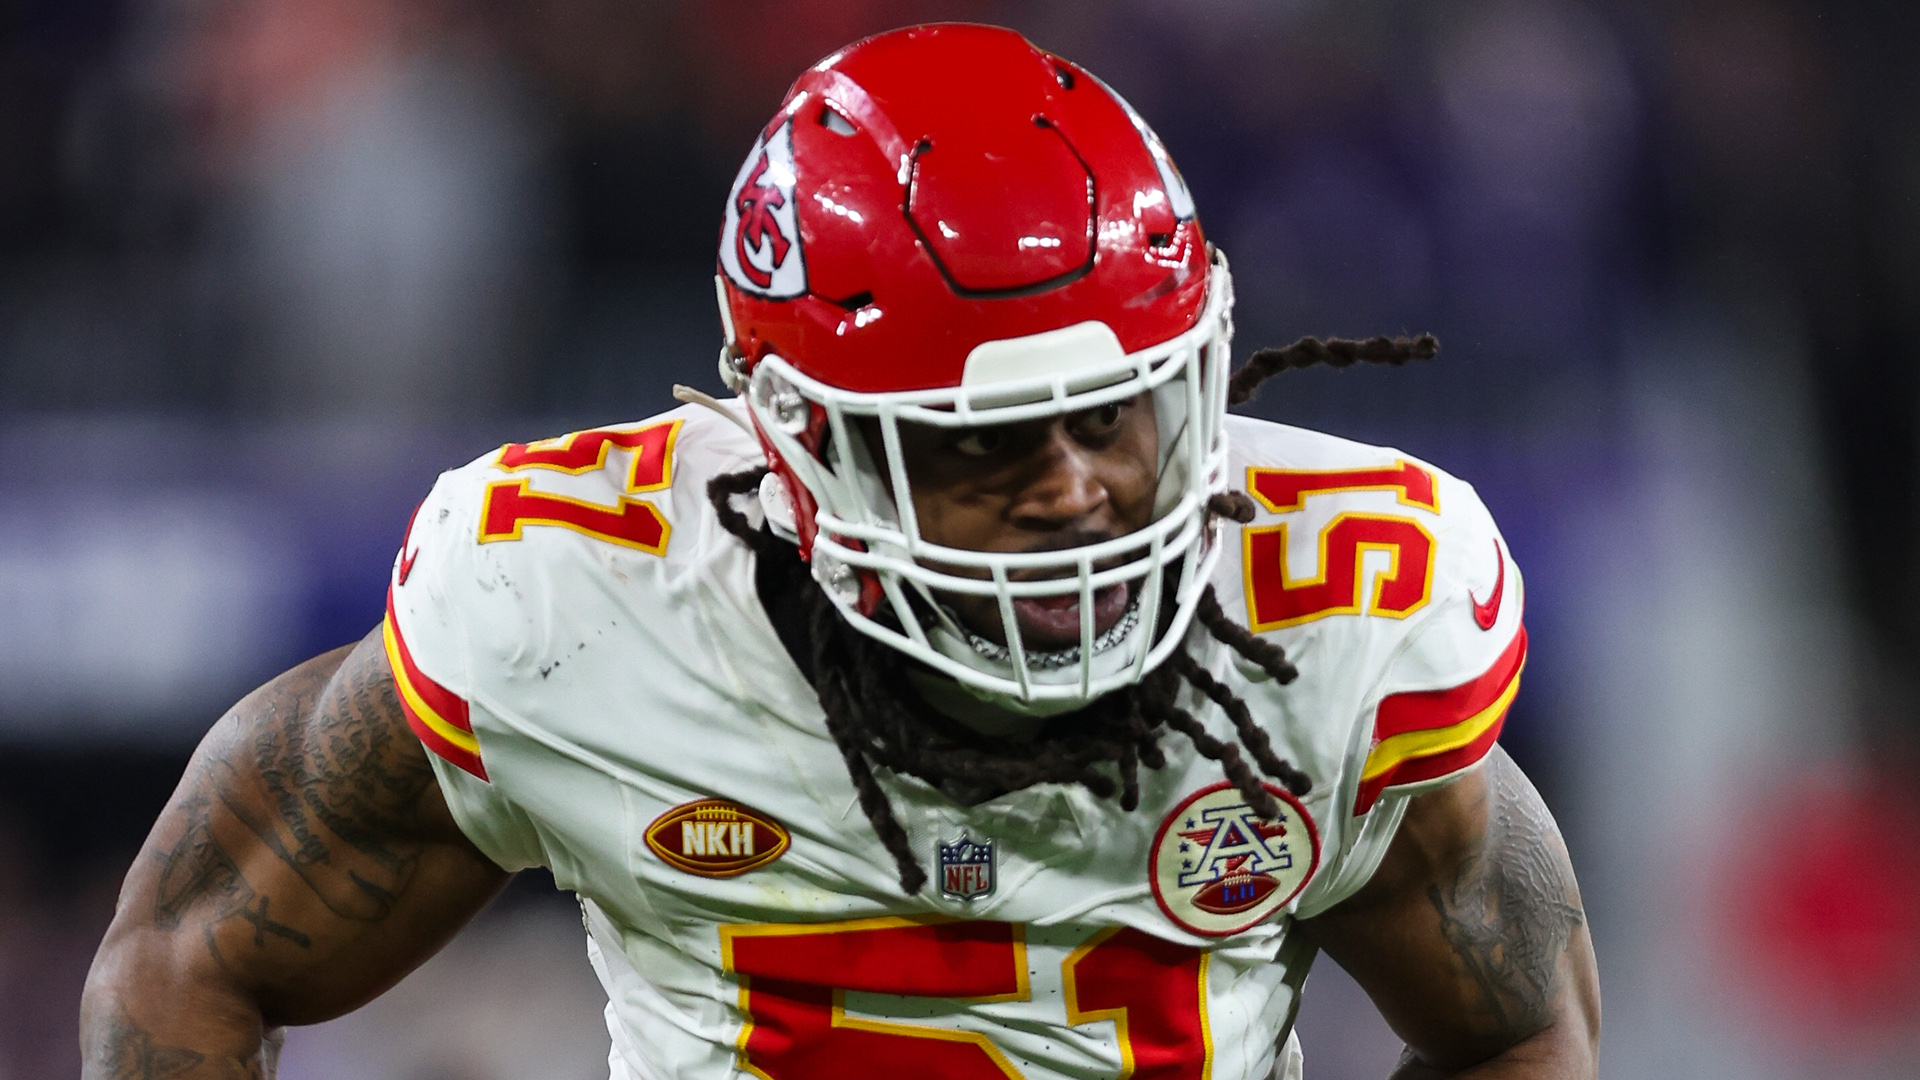 ON THE EDGE Kansas City Chiefs star who won two Super Bowls agrees $24m new contract to stay with Patrick Mahomes’ team